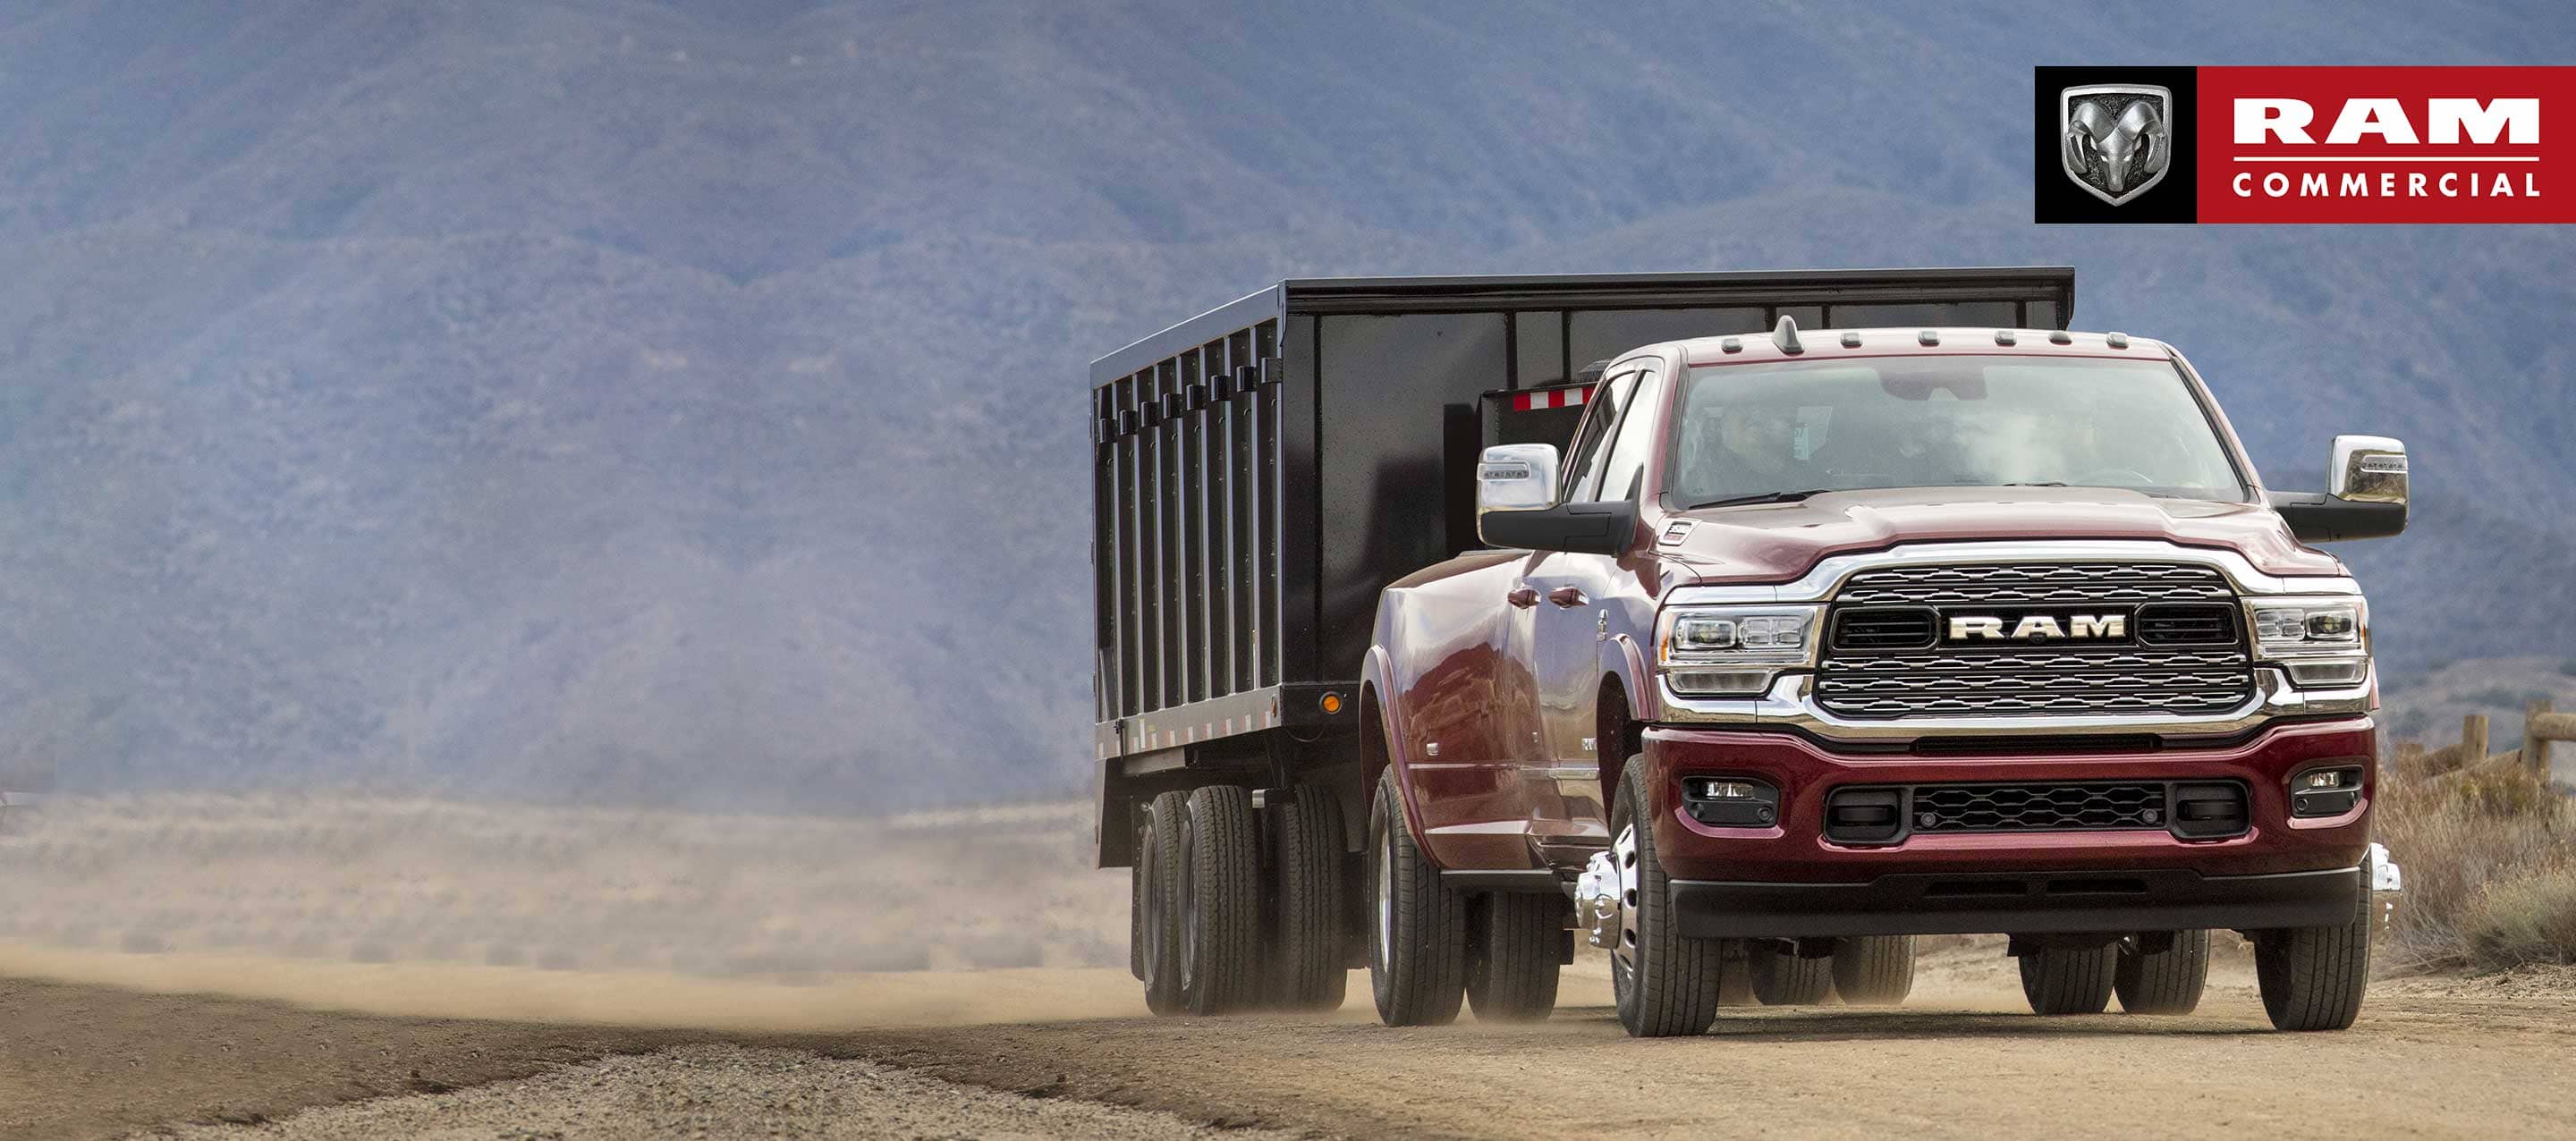 A 2023 Ram 3500 Limited towing a dump body trailer on a dirt road with mountains in the distance.